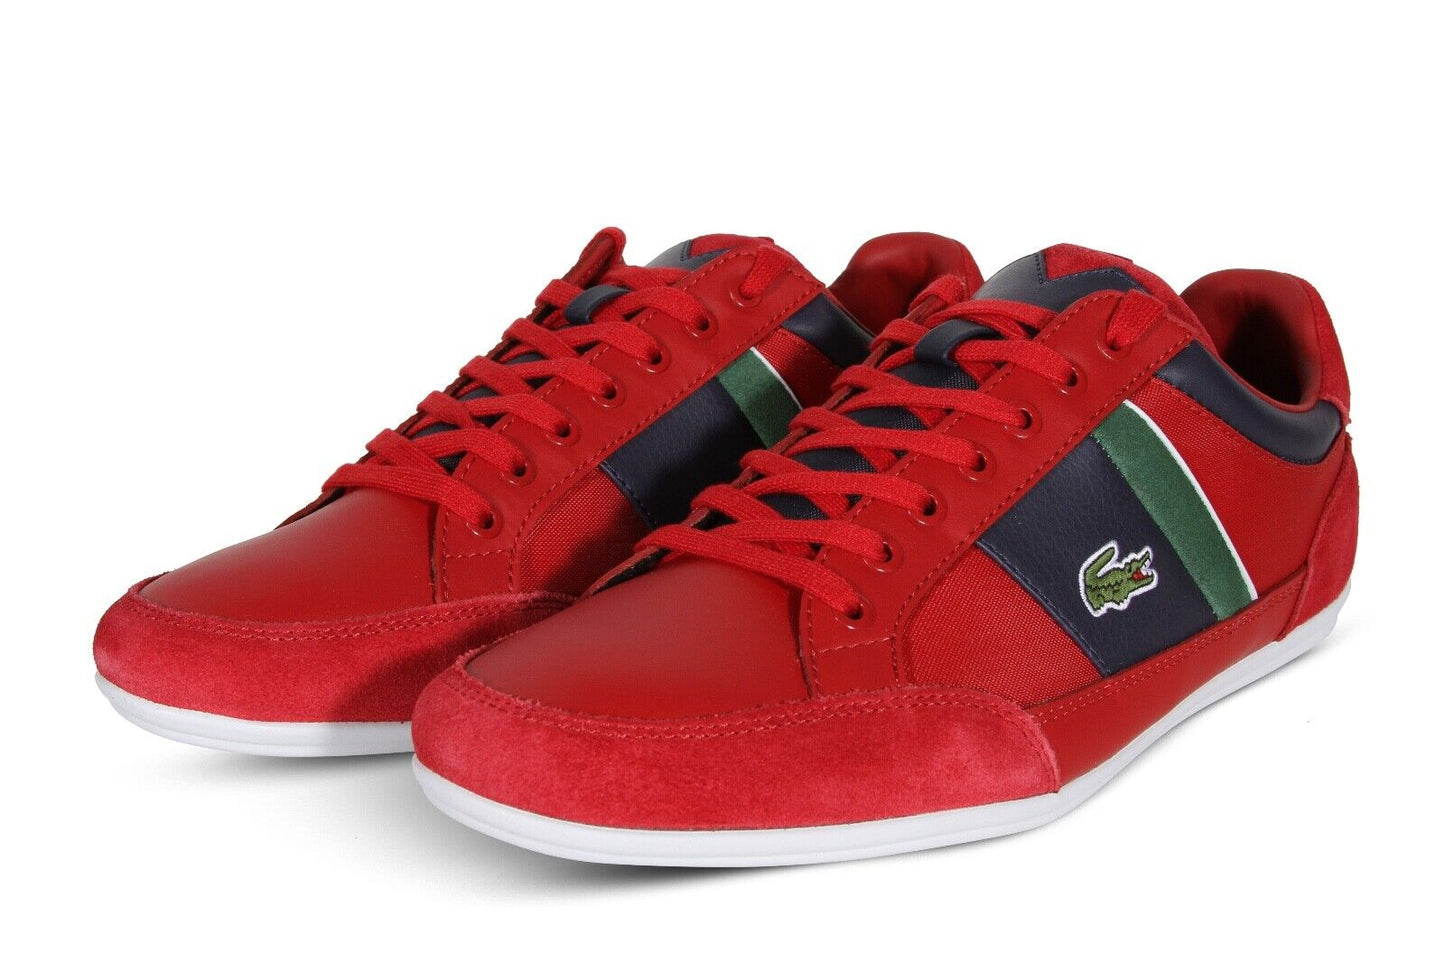 Lacoste Chaymon 123 1 CMA Men’s Sneakers in Red and Navy Blue 745CMA0017RS7